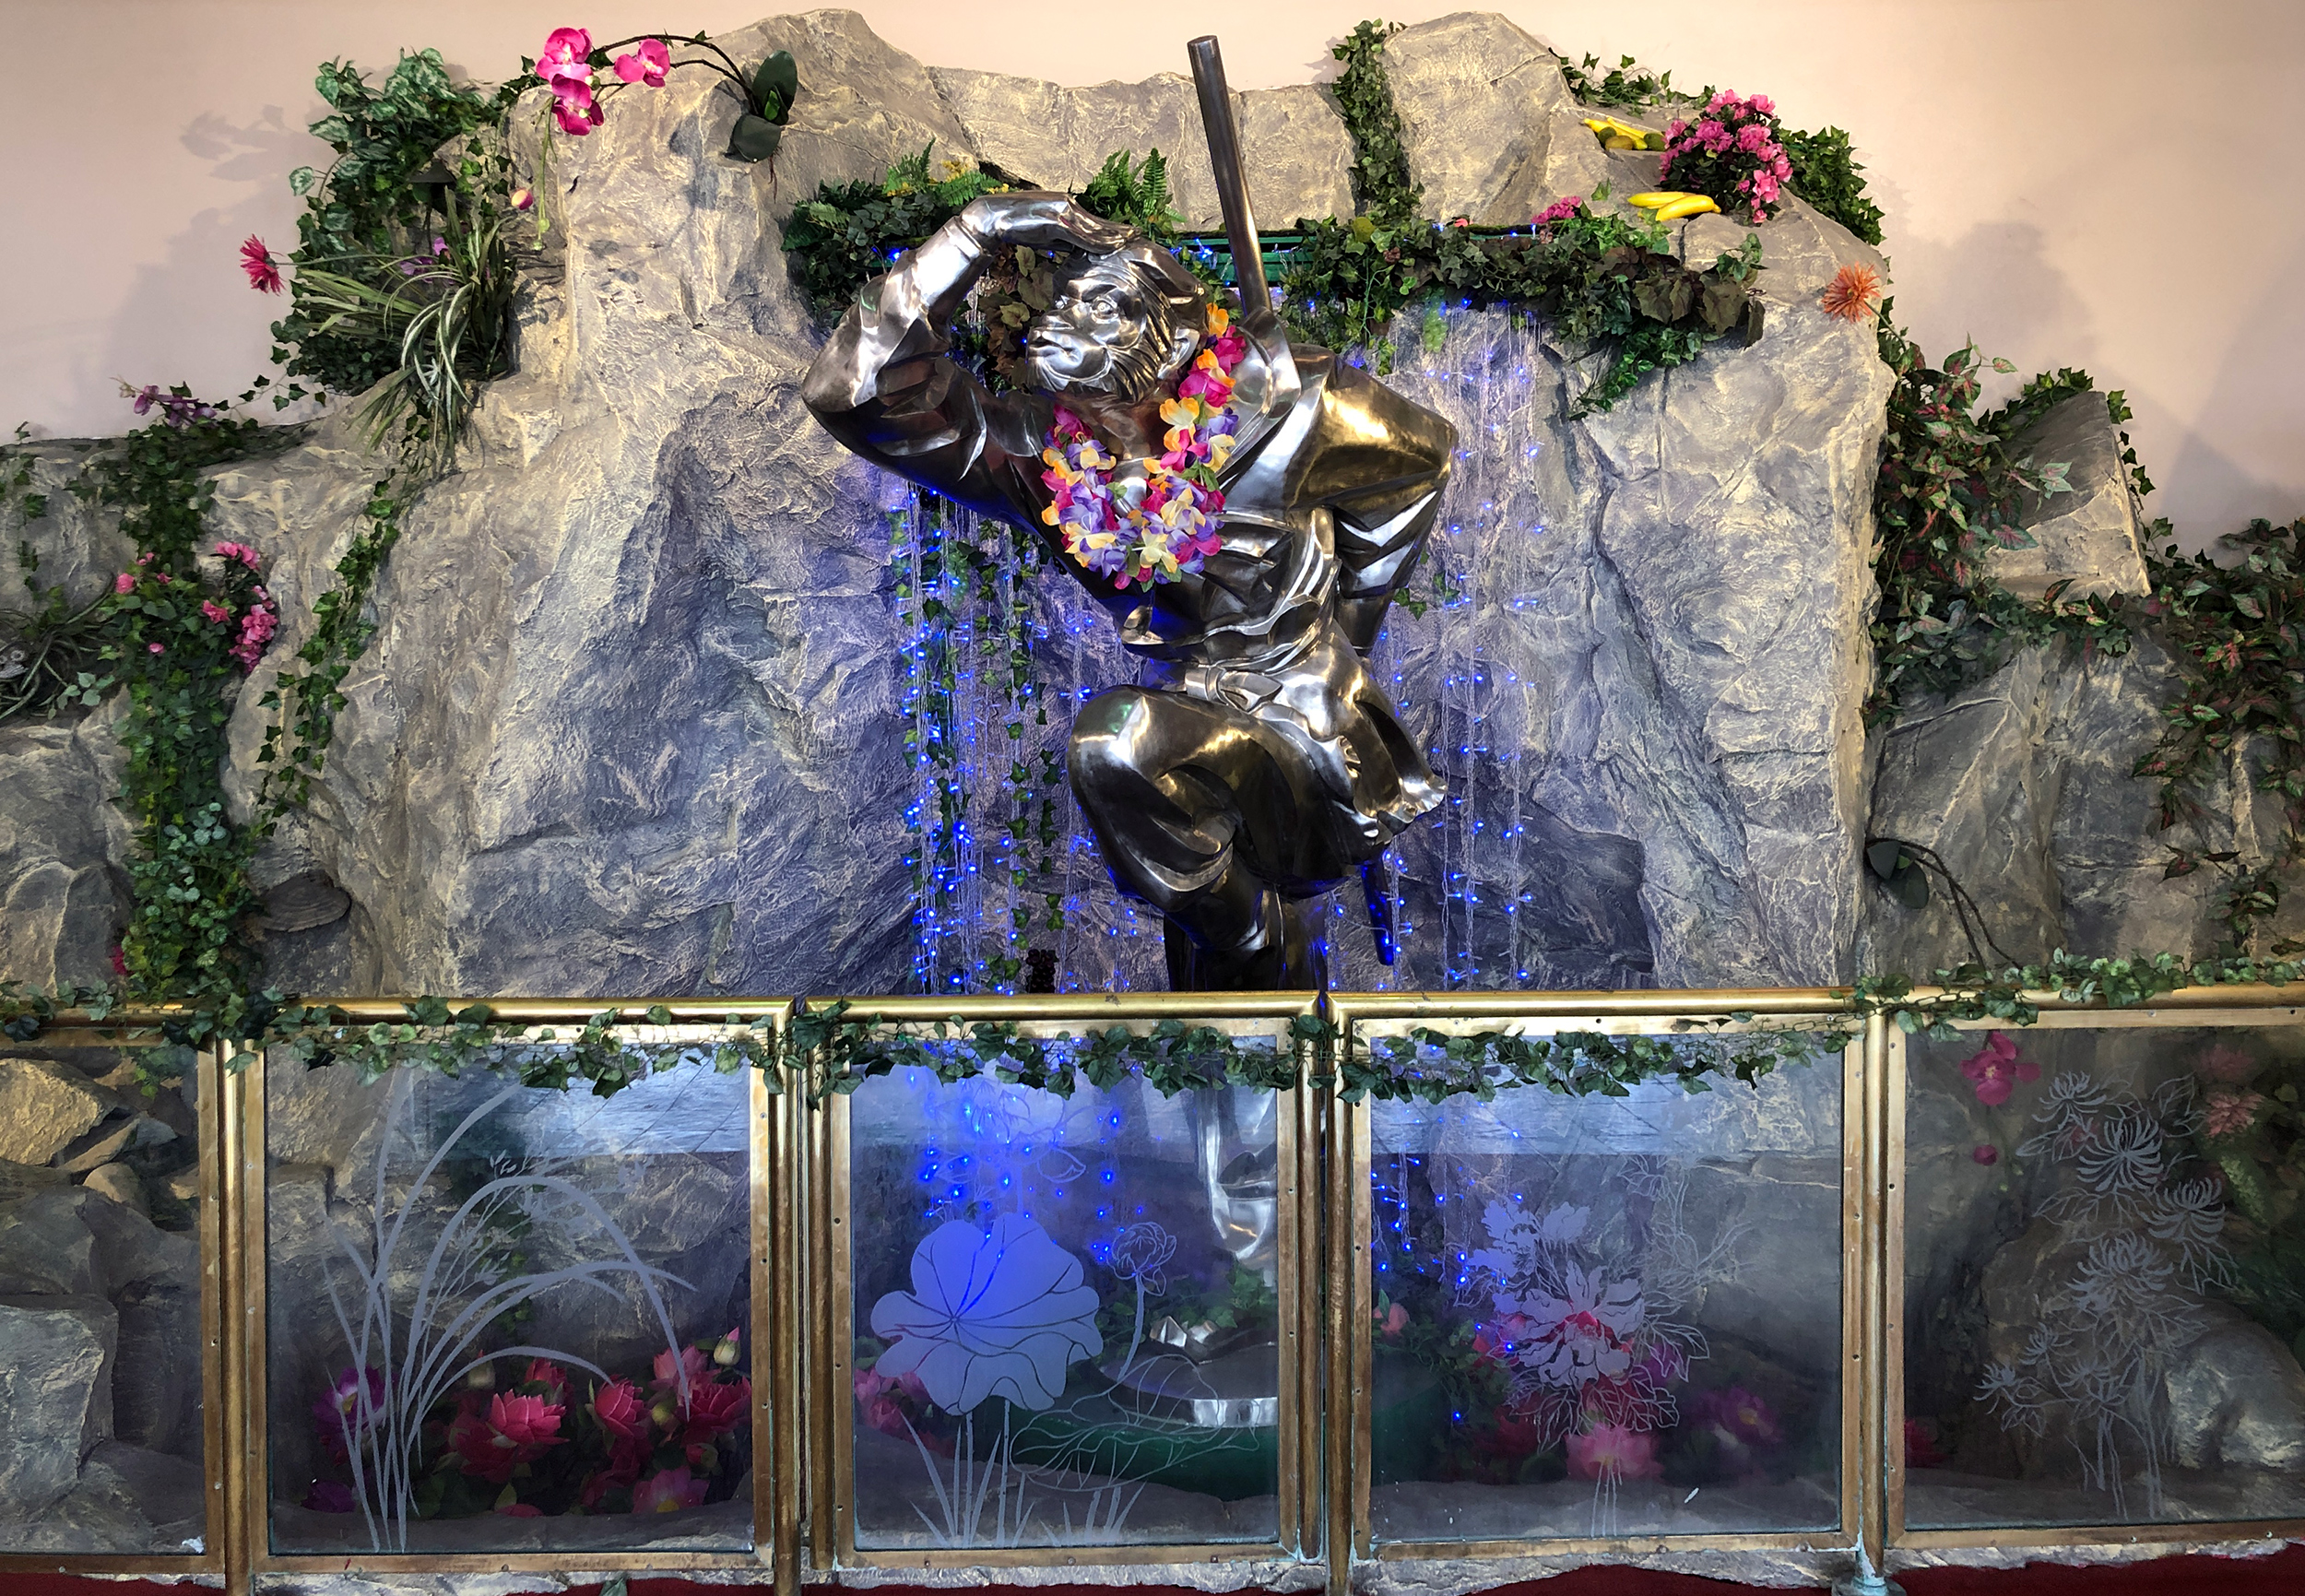 Sun Wukong Leads a Journey to the West Theme at the Las Vegas Chinatown Plaza